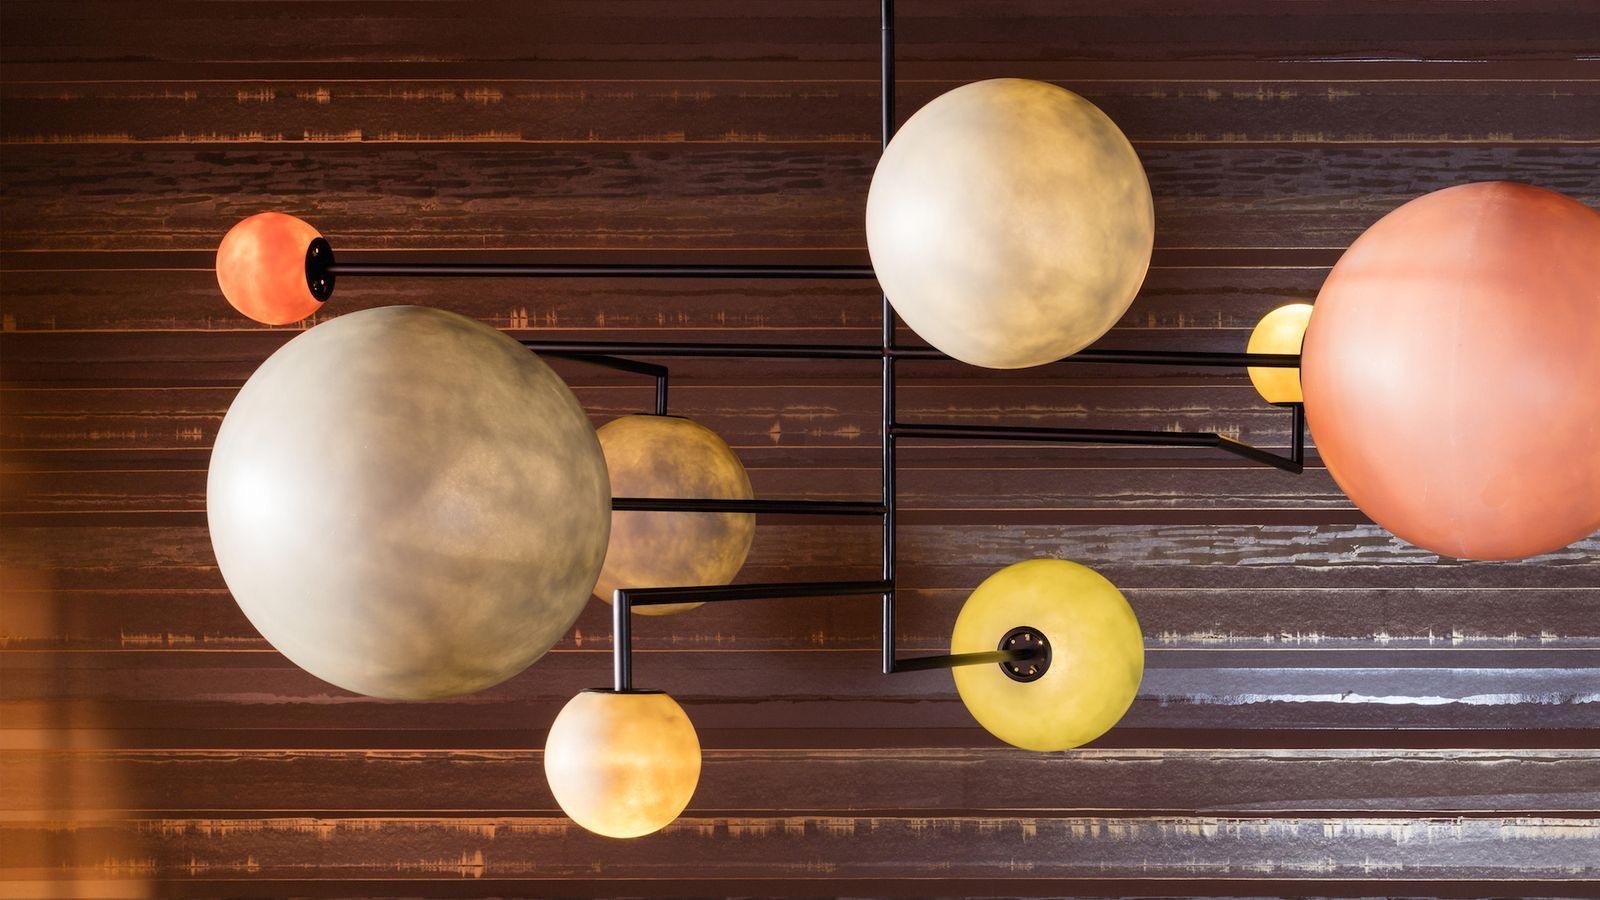 Solar system horizontal chandelier Lambada 061, Dimoremilano lighting, Italy. Resembling a solar system, this ceiling lamp is made in matte black painted metal with handmade spheres of colored fiberglass.

Dimoremilano's Progretto Non Finito